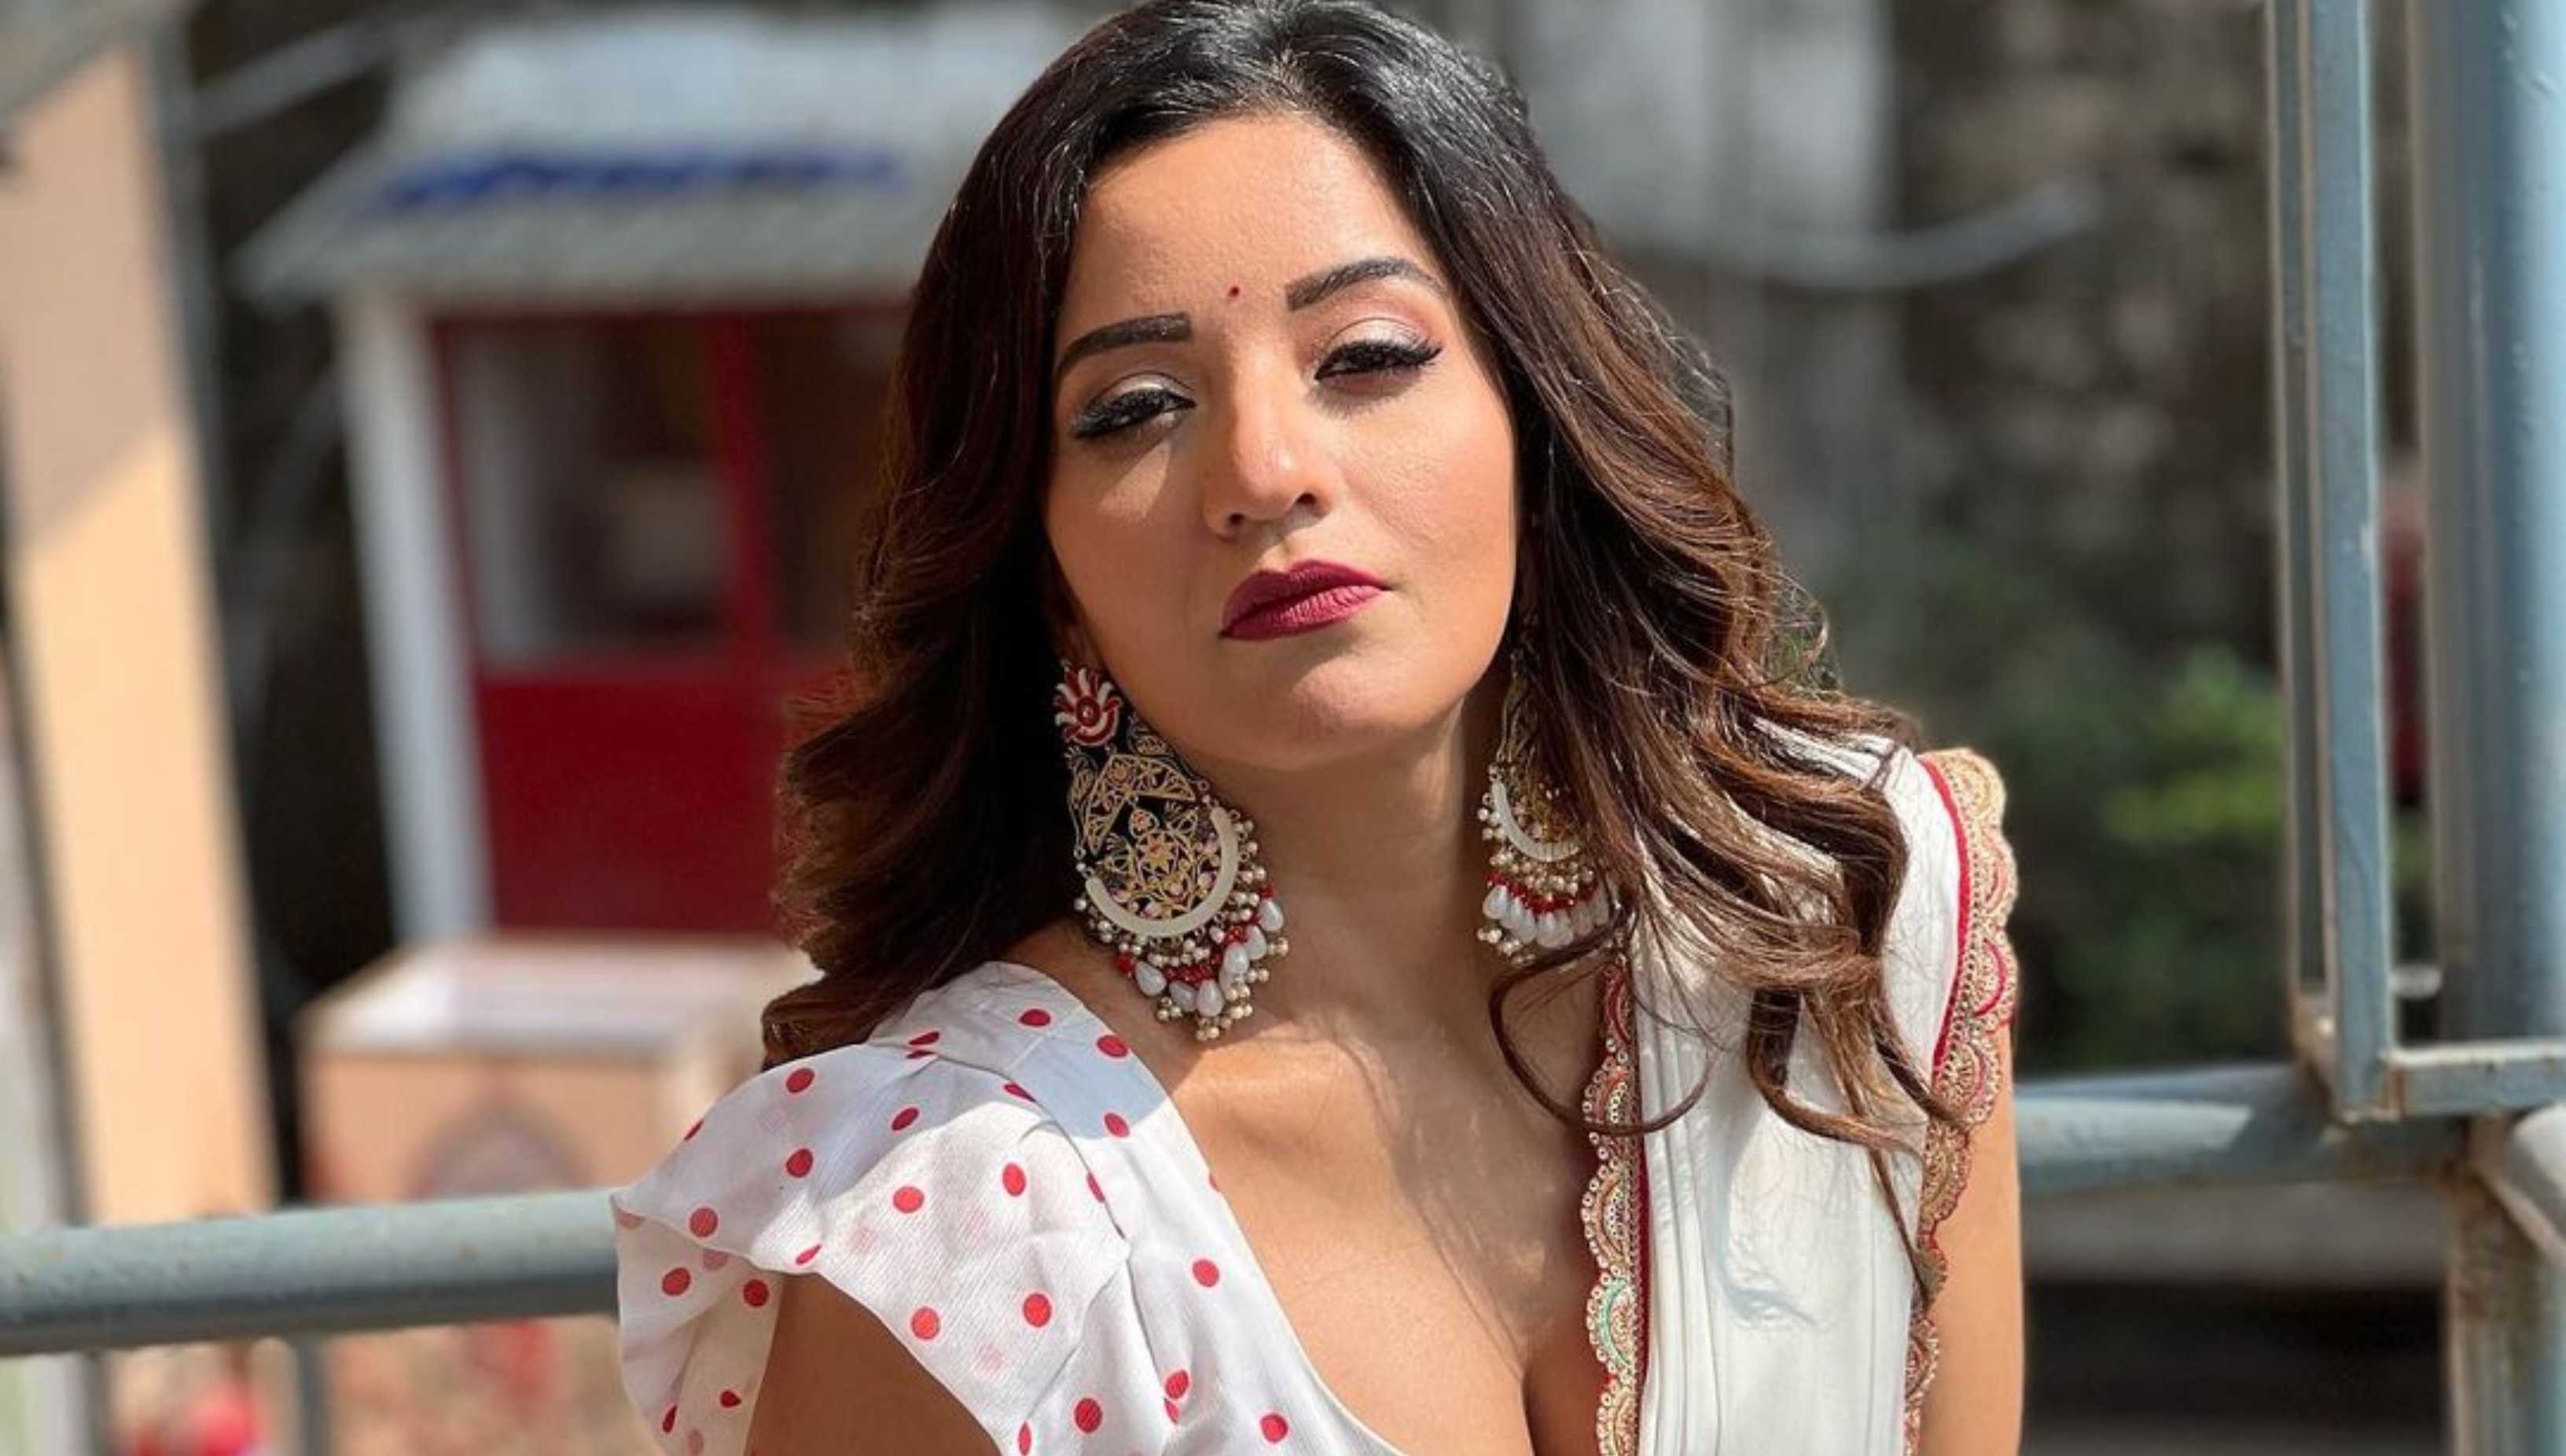 ‘Makeup ka khel hai’: Monalisa slays in a white saree, but gets brutally trolled for using excessive makeup